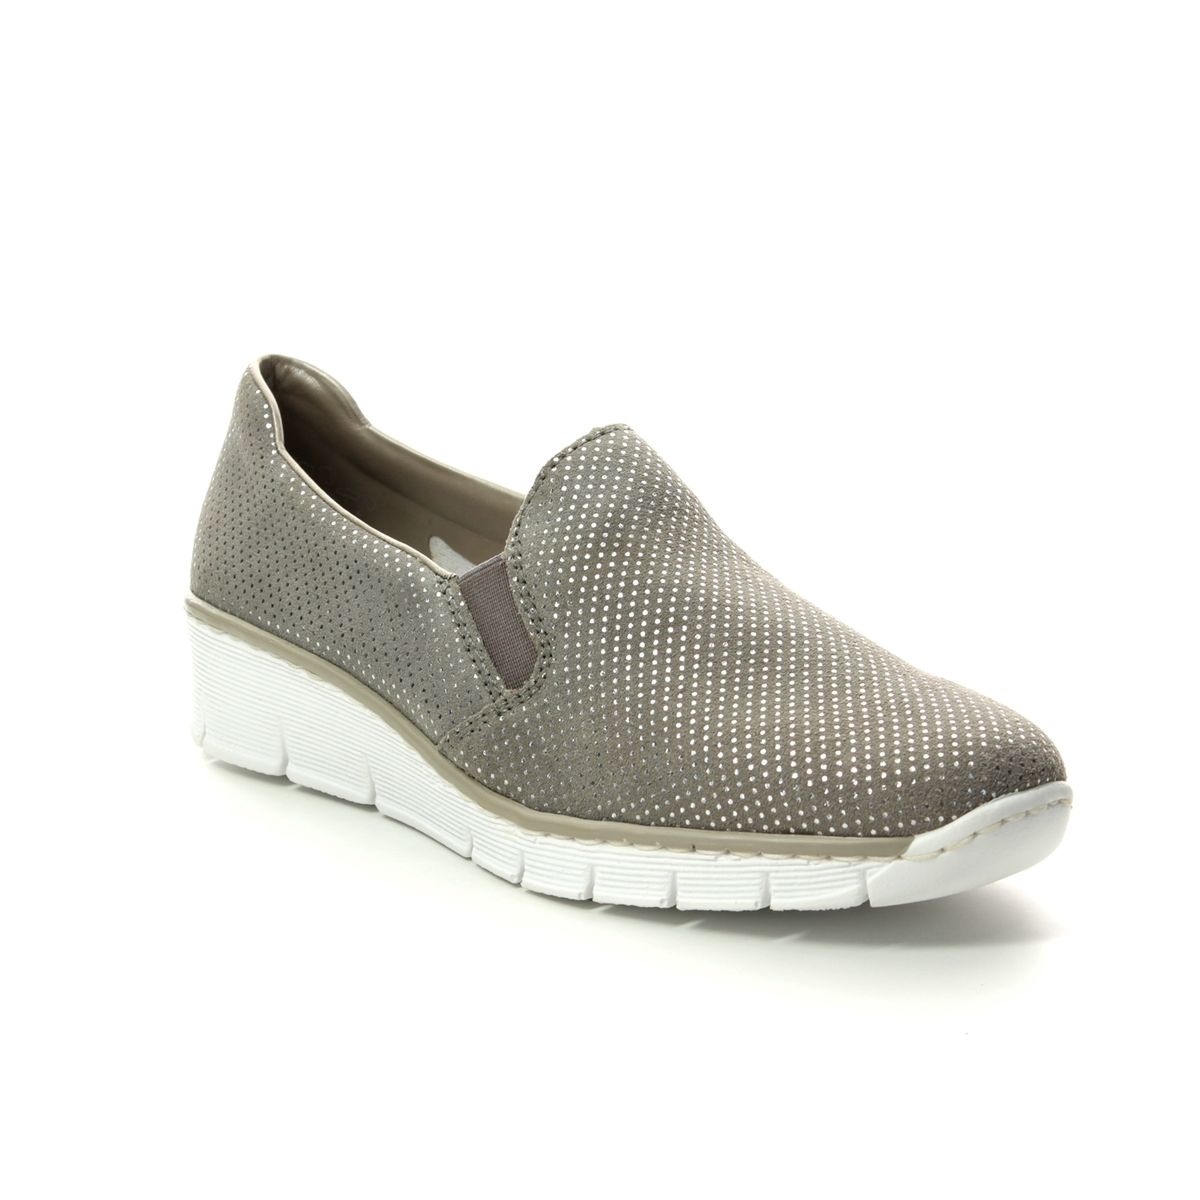 Rieker Bocciago Light Taupe Womens Comfort Slip On Shoes 53766-41 In Size 42 In Plain Light Taupe